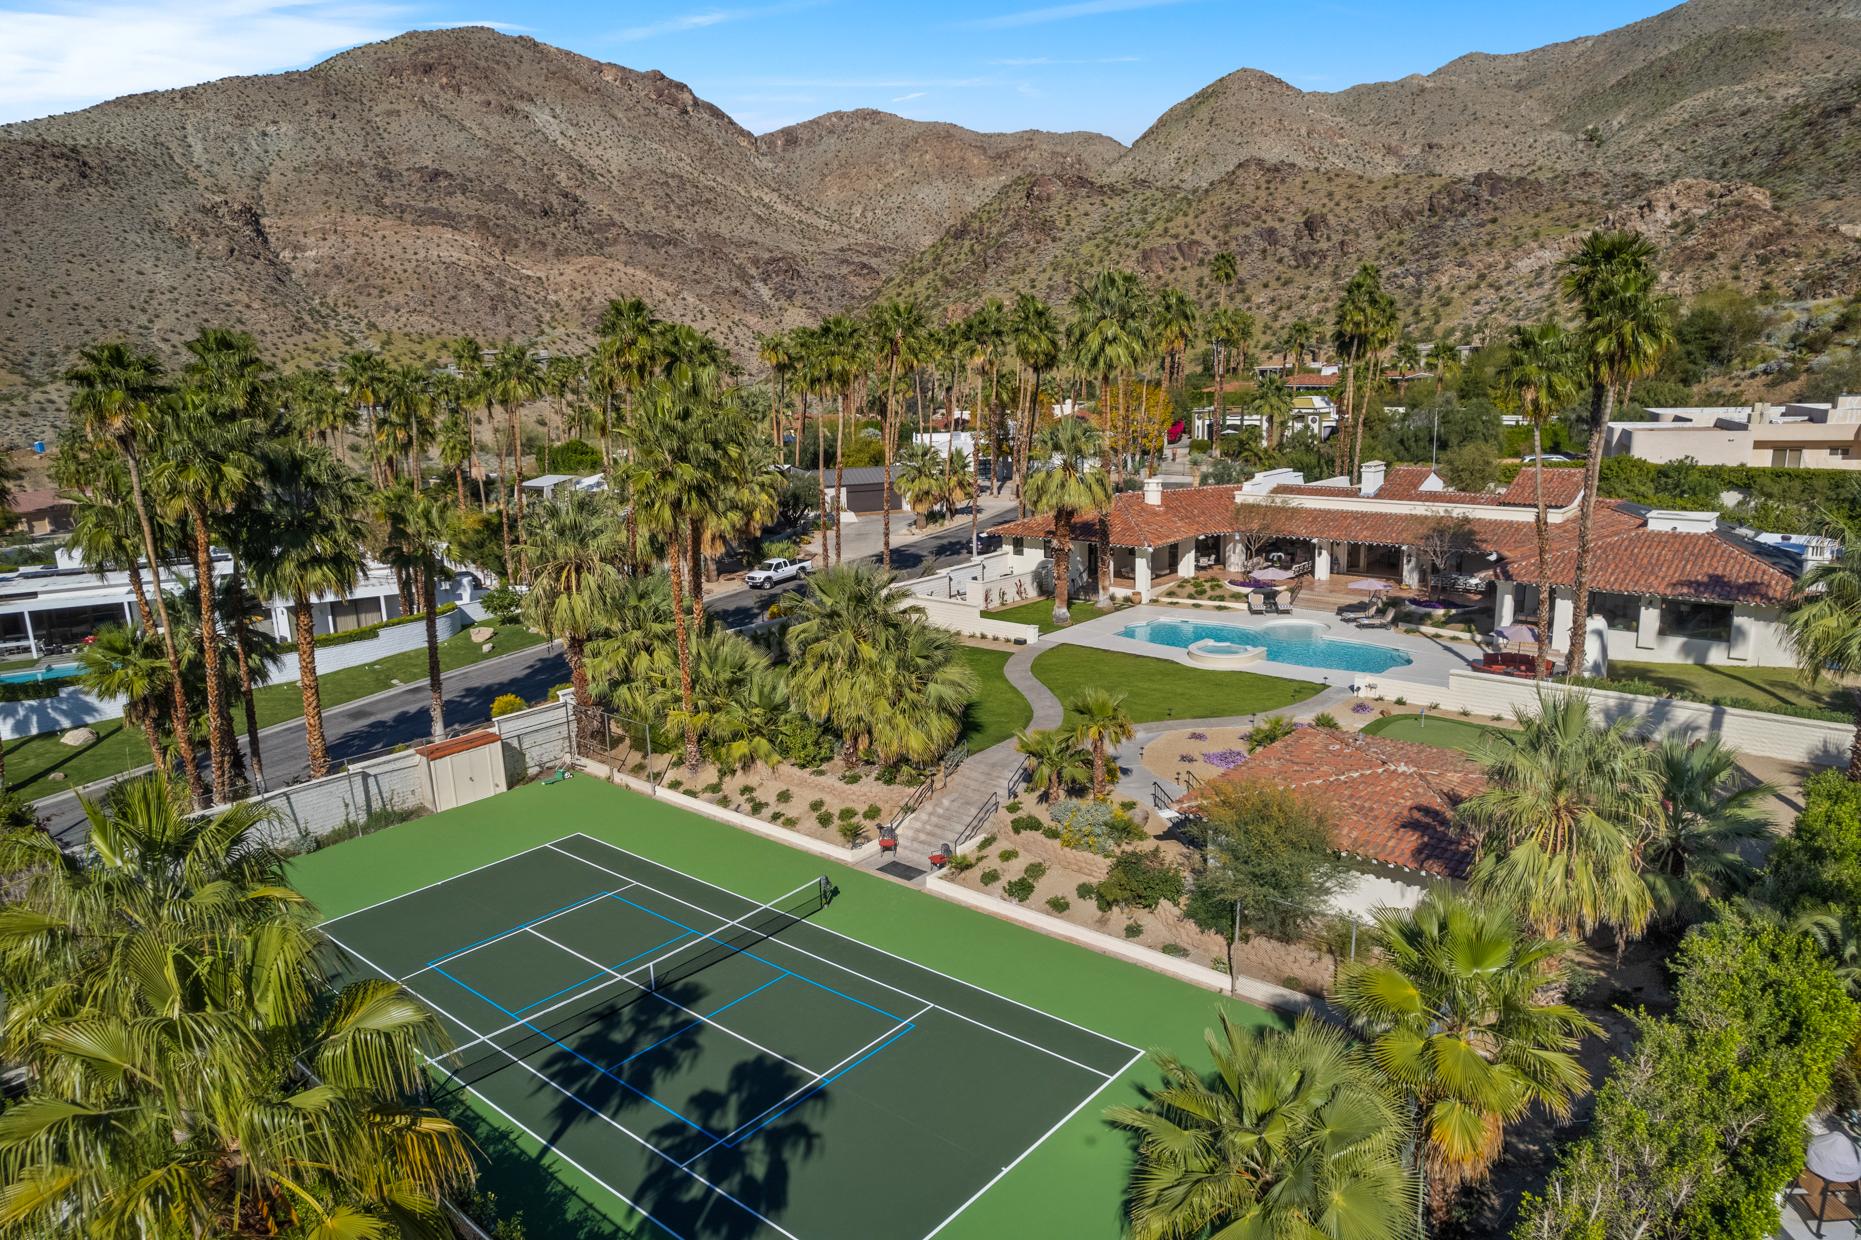 An aerial view of a luxurious resort with a tennis court in the foreground, a swimming pool surrounded by palm trees, and a mountainous backdrop.